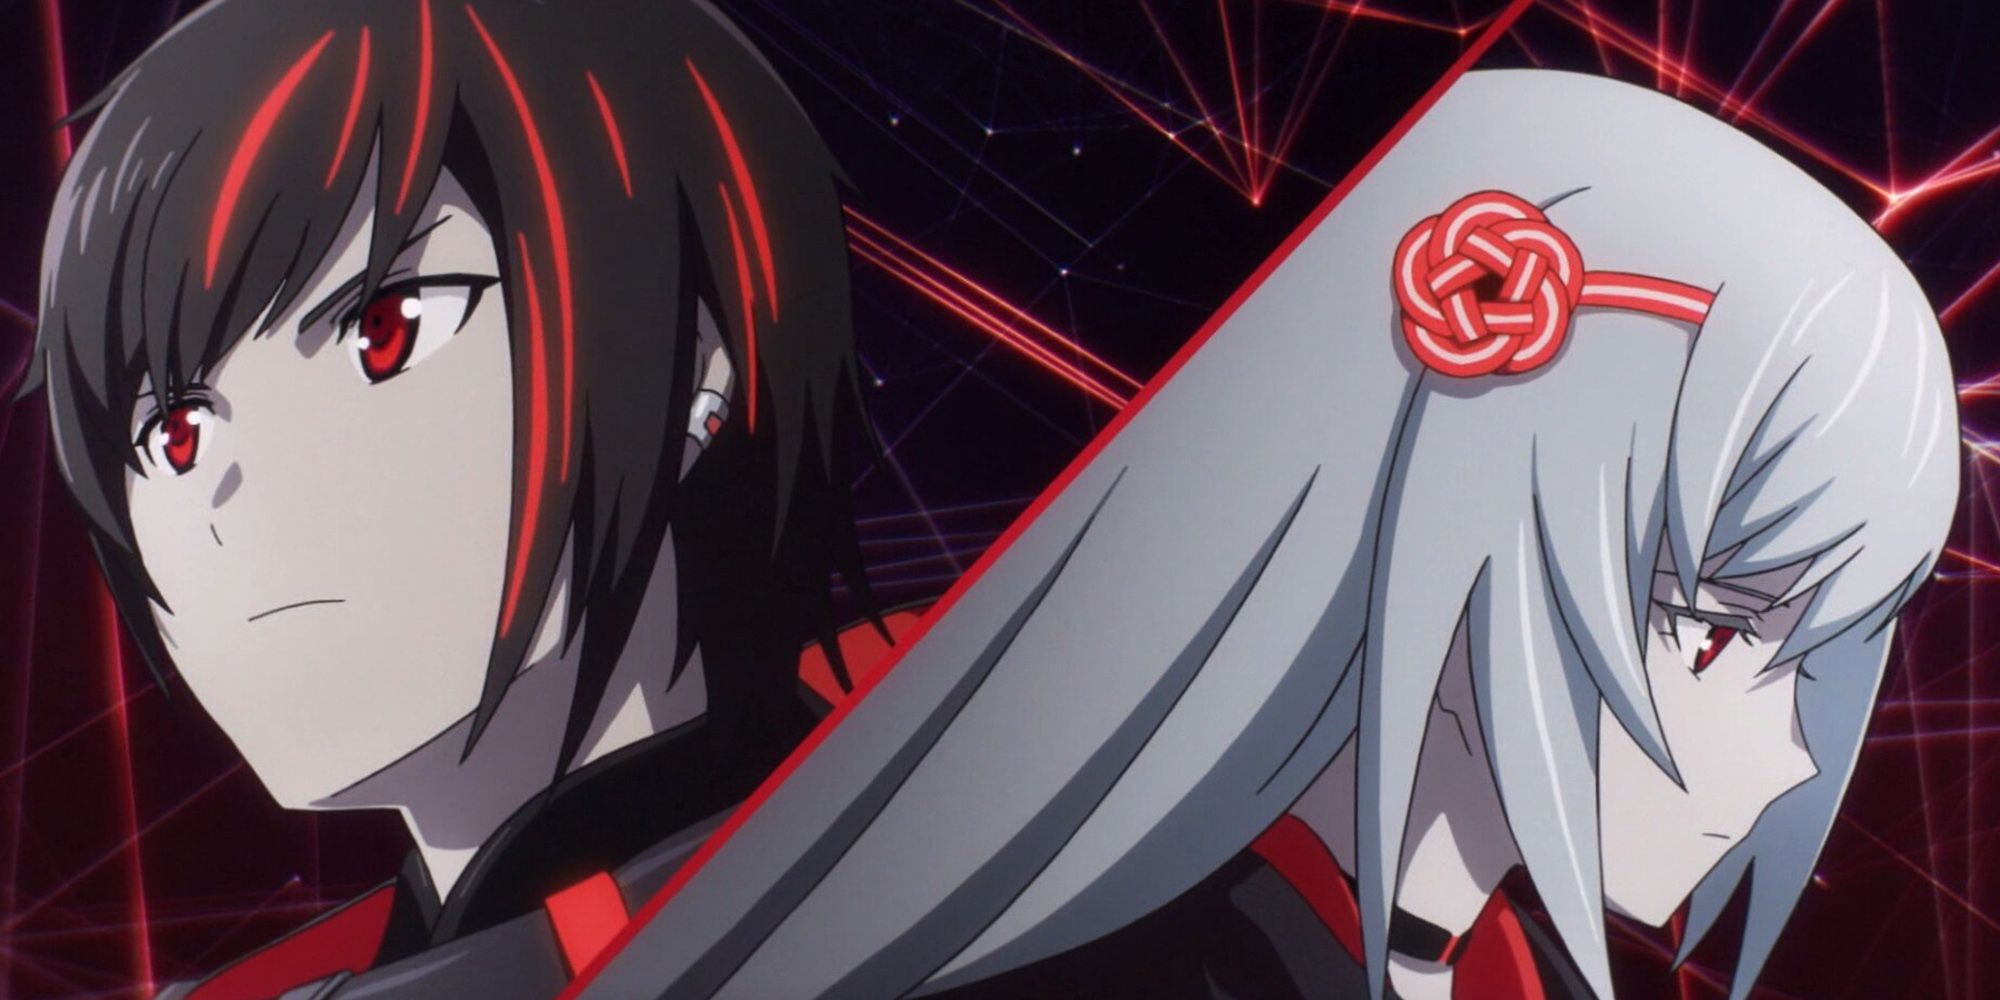 Scarlet Nexus Headshot Of Yuito And Kasane Side By Side In The Anime Opening